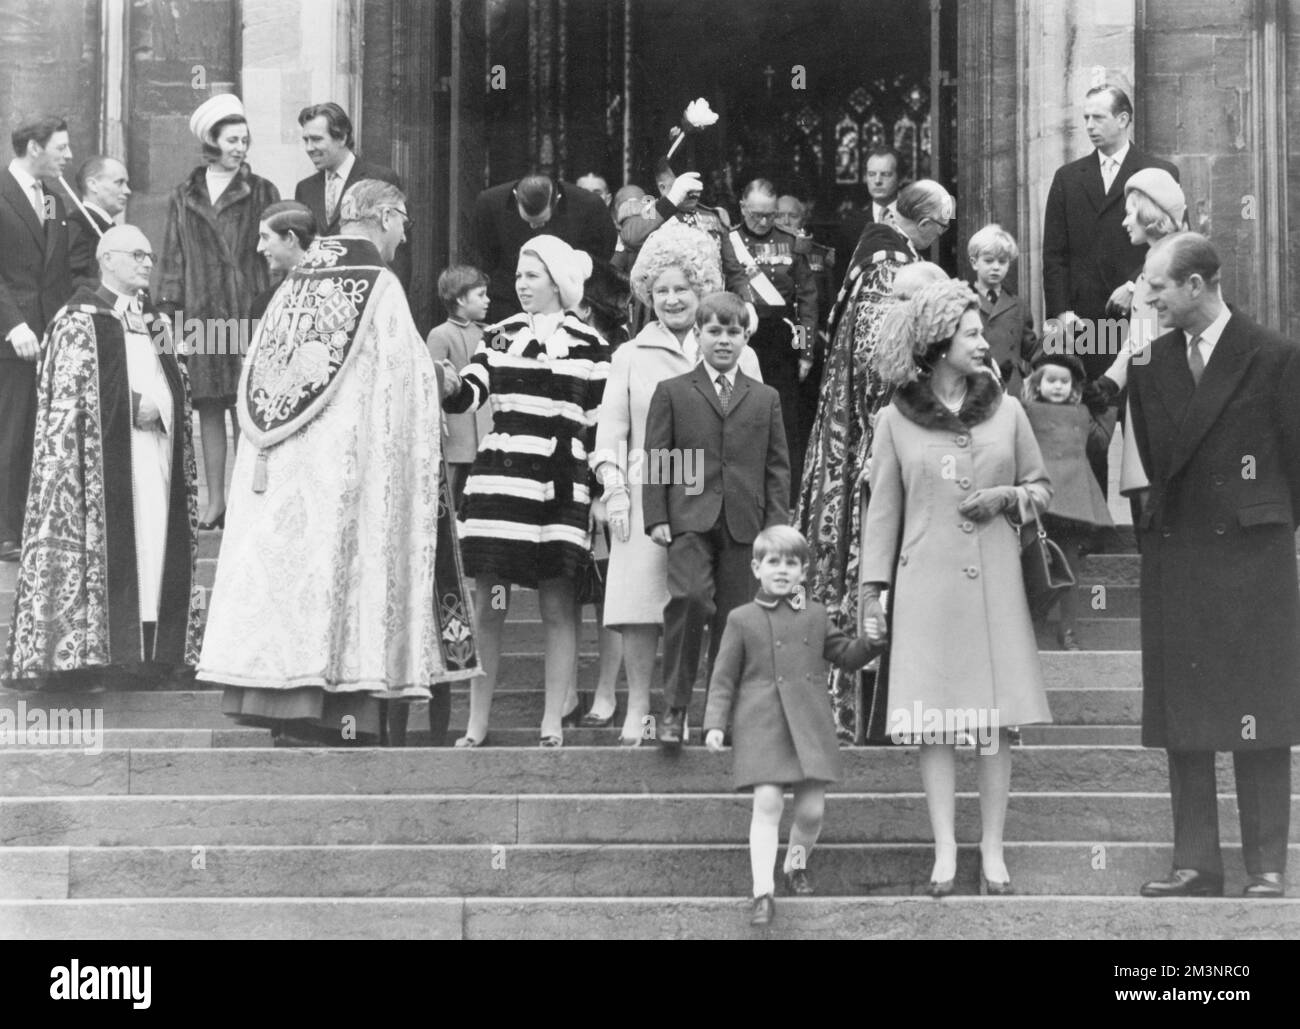 Members of the Royal family leave St. George's Chapel, Windsor after attending the Christmas service there.  In the foreground is Queen Elizabeth II holding the hand of her youngest son, Prince Edward (Earl of Wessex) as she talks to her husband, Prince Philip, Duke of Edinburgh.  Behind Prince Edward is Prince Andrew (Duke of York) with his grandmother, Queen Elizabeth the Queen Mother while his sister, Princess Anne shakes hands with an unidentified prelate.  At top far left is Angus Ogilvy with his wife Princess Alexandra of Kent who is talking to Lord Snowdon.  Next to Snowdon is his won, Stock Photo